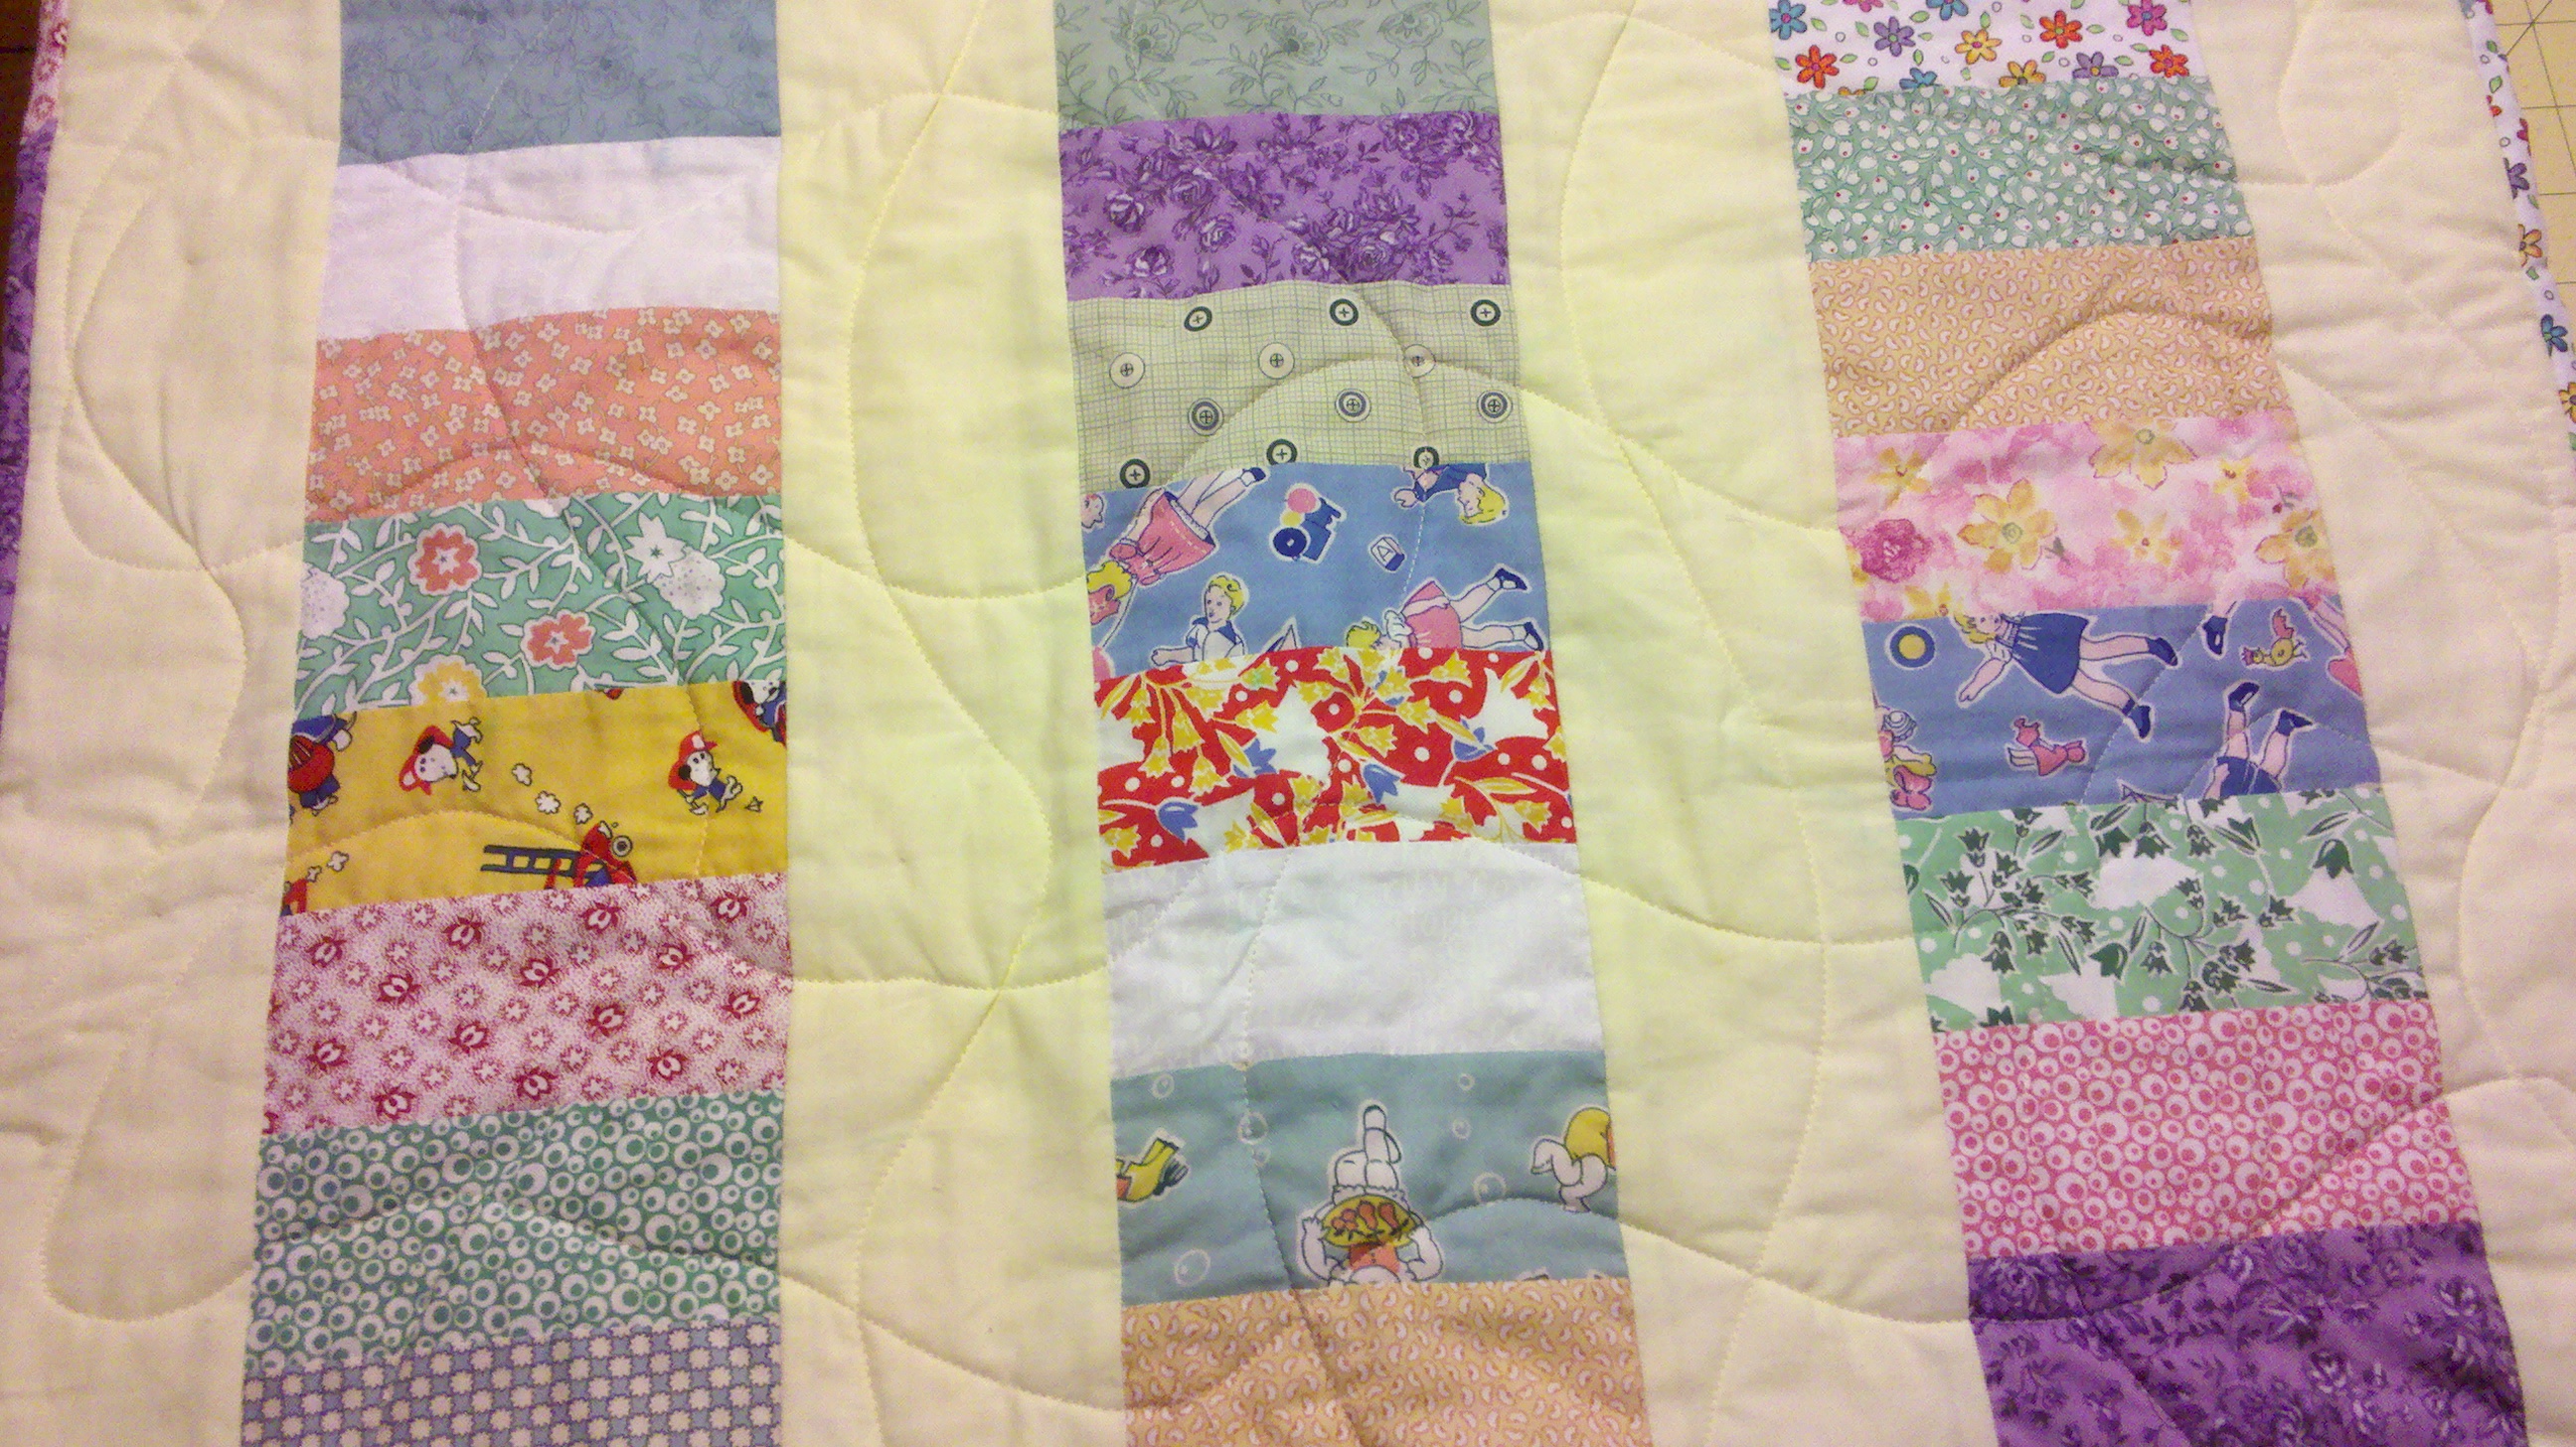 Another Hatchett Job, sewing, quilting, homemade gifts, frugal gifts